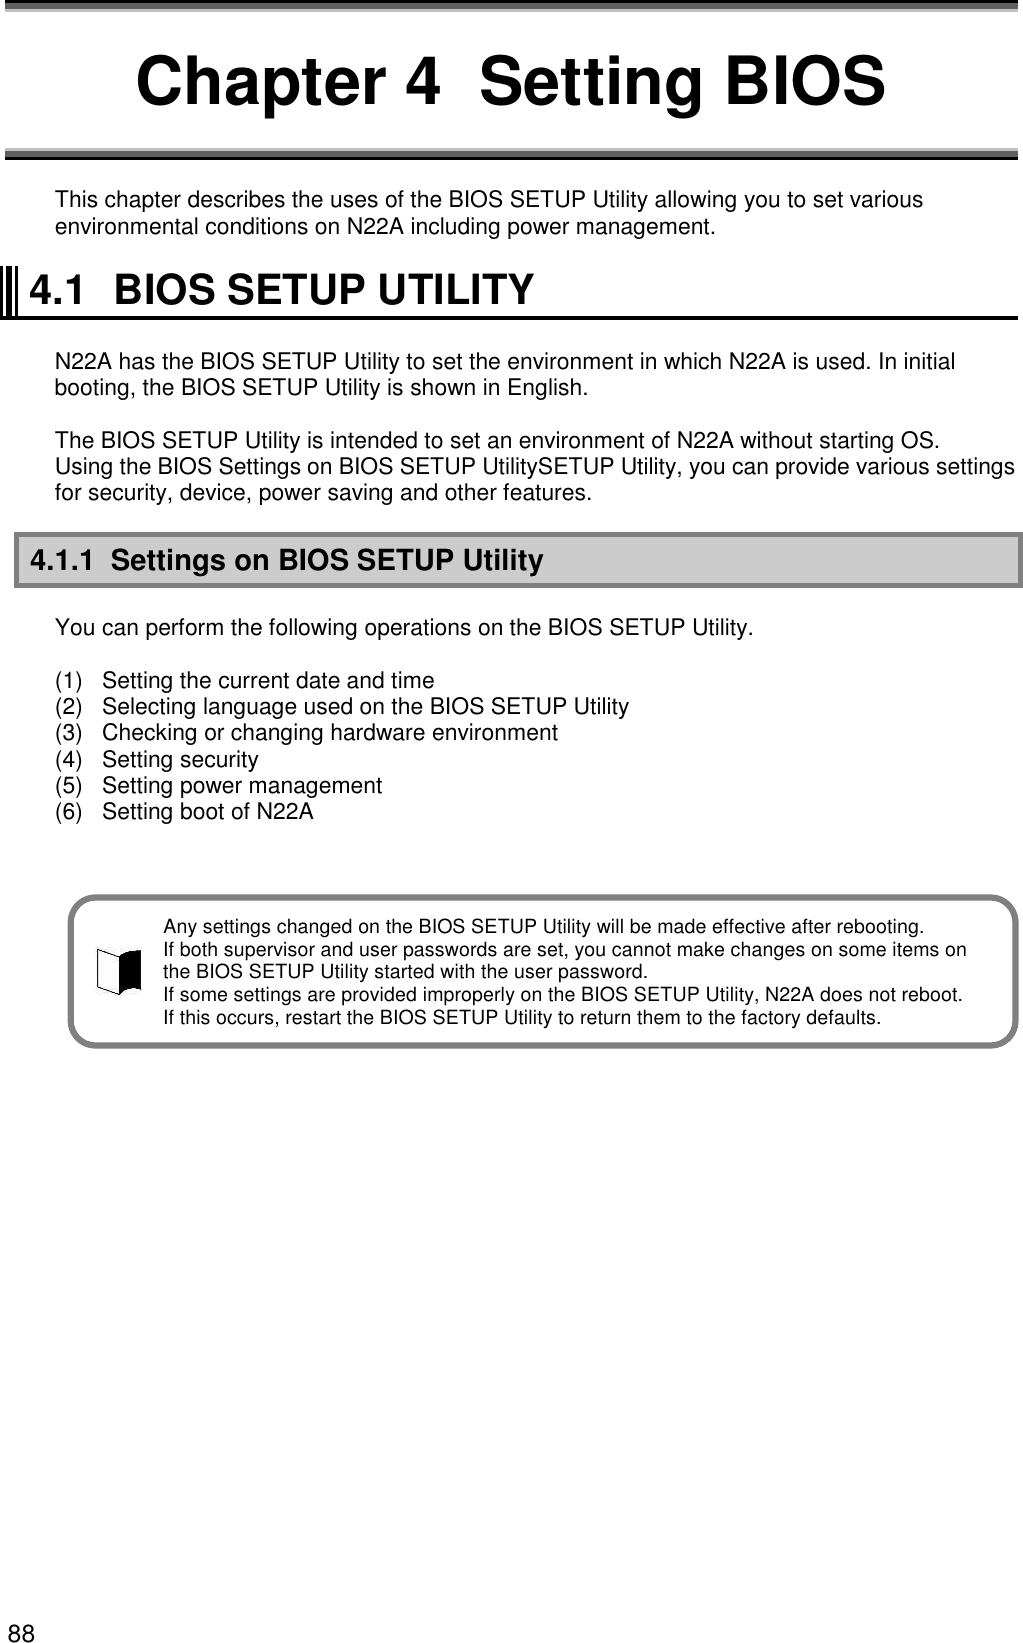 88 Chapter 4  Setting BIOS  This chapter describes the uses of the BIOS SETUP Utility allowing you to set various environmental conditions on N22A including power management.  4.1  BIOS SETUP UTILITY  N22A has the BIOS SETUP Utility to set the environment in which N22A is used. In initial booting, the BIOS SETUP Utility is shown in English.  The BIOS SETUP Utility is intended to set an environment of N22A without starting OS. Using the BIOS Settings on BIOS SETUP UtilitySETUP Utility, you can provide various settings for security, device, power saving and other features.  4.1.1  Settings on BIOS SETUP Utility  You can perform the following operations on the BIOS SETUP Utility.  (1)  Setting the current date and time (2)  Selecting language used on the BIOS SETUP Utility (3)  Checking or changing hardware environment (4)  Setting security (5)  Setting power management (6)  Setting boot of N22A    Any settings changed on the BIOS SETUP Utility will be made effective after rebooting. If both supervisor and user passwords are set, you cannot make changes on some items on   the BIOS SETUP Utility started with the user password. If some settings are provided improperly on the BIOS SETUP Utility, N22A does not reboot. If this occurs, restart the BIOS SETUP Utility to return them to the factory defaults. 